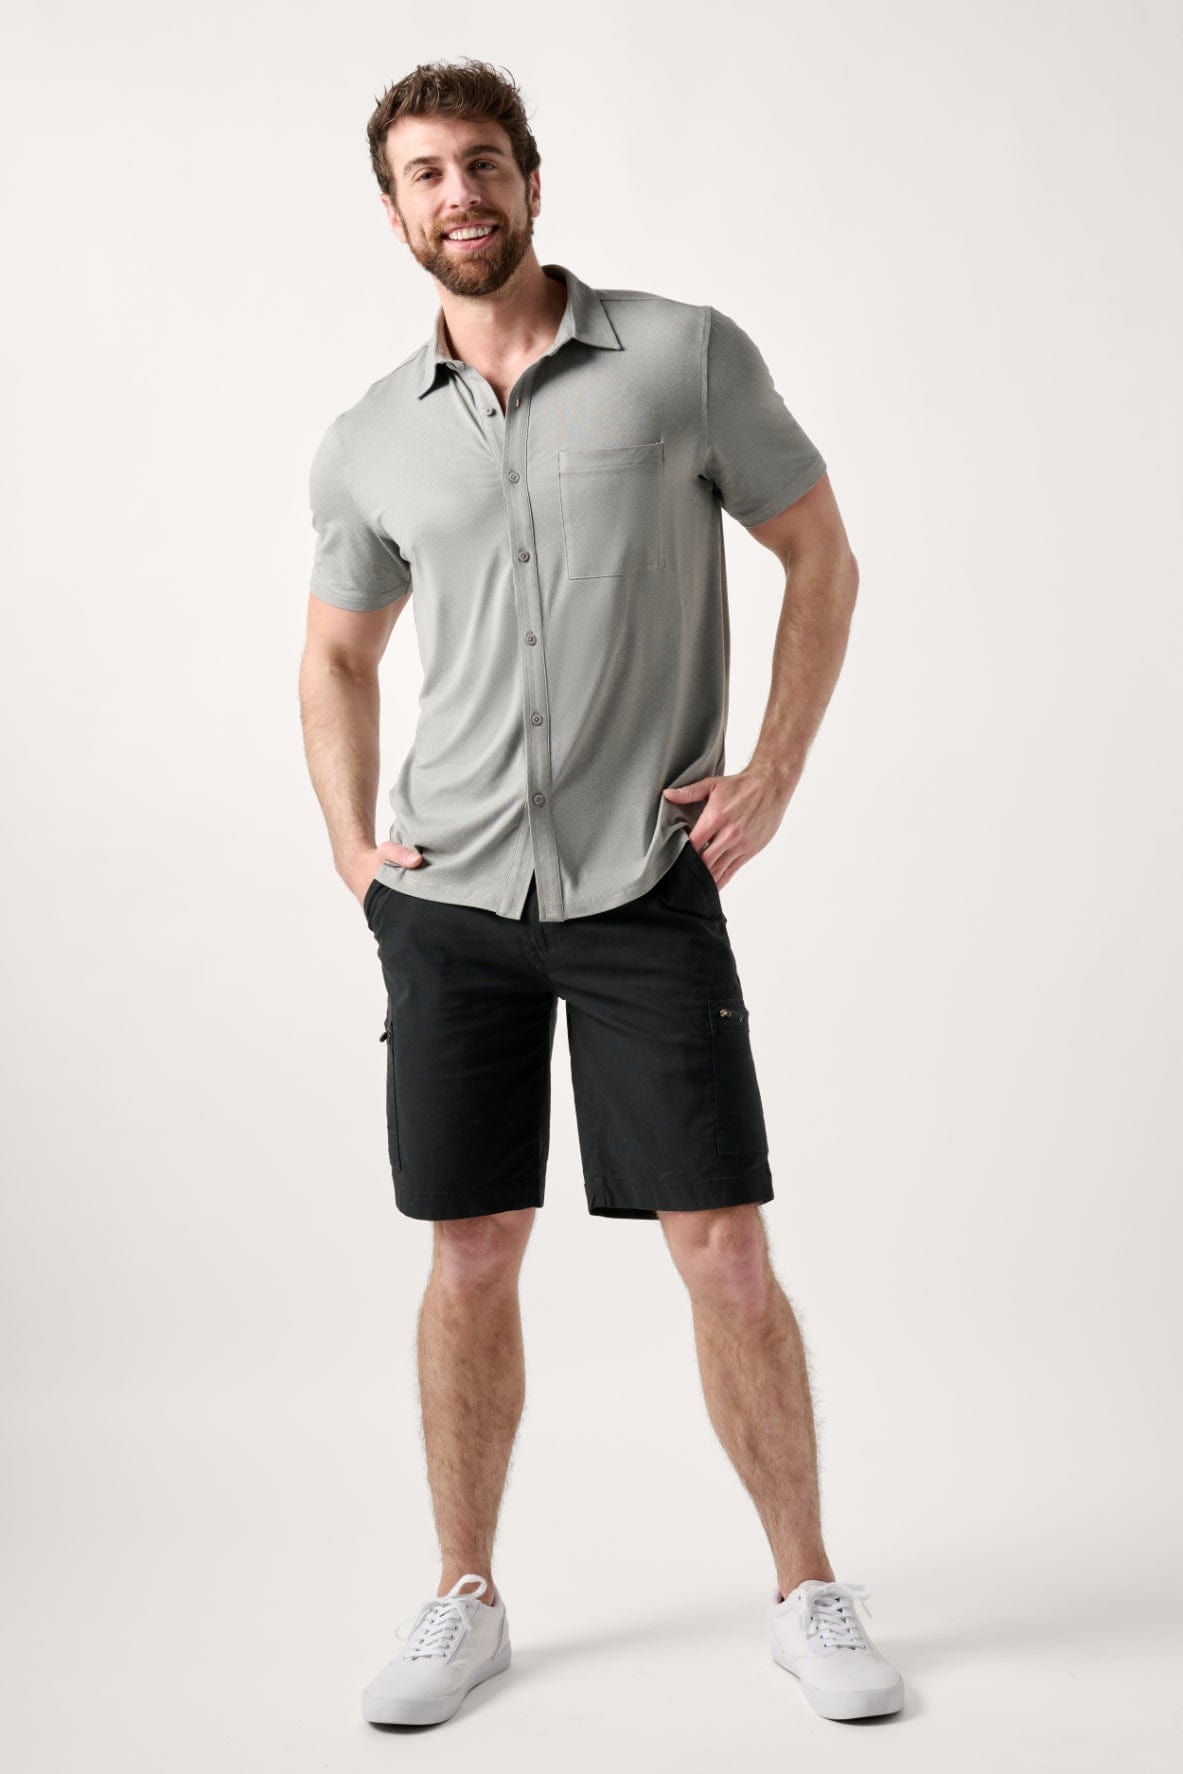 Male model dressed in casual style with the WEARFIRST All Day Performance Shirt in Gray Heather